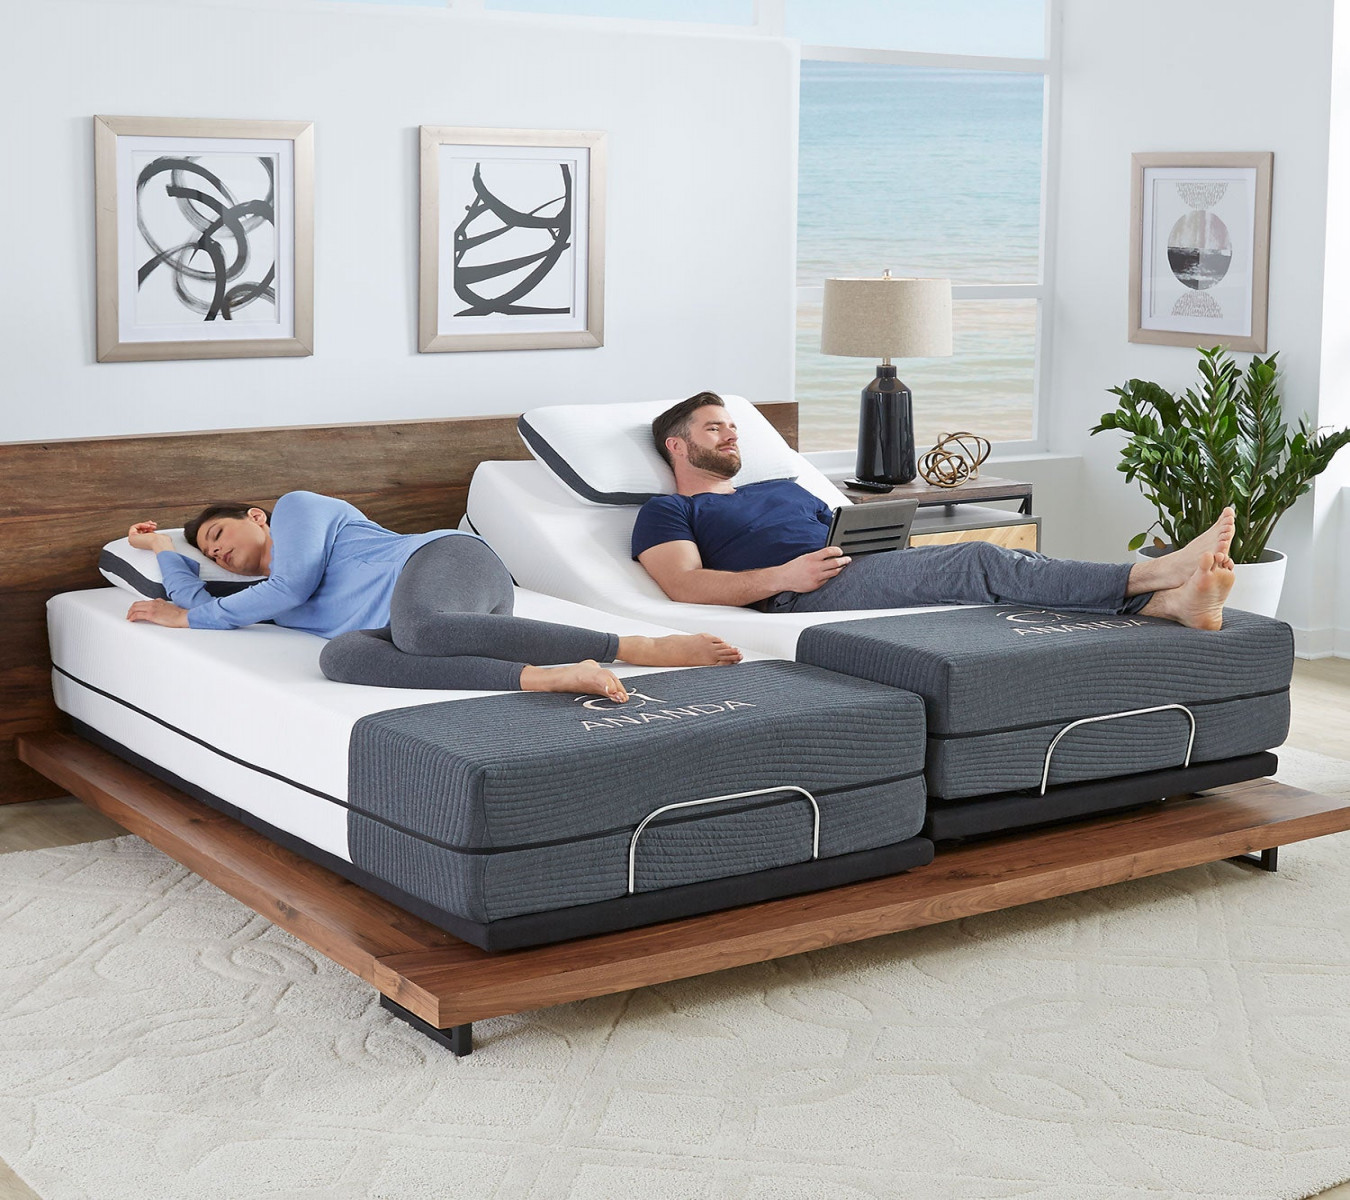 King Size Adjustable Bed With Mattress Clearance, SAVE %.